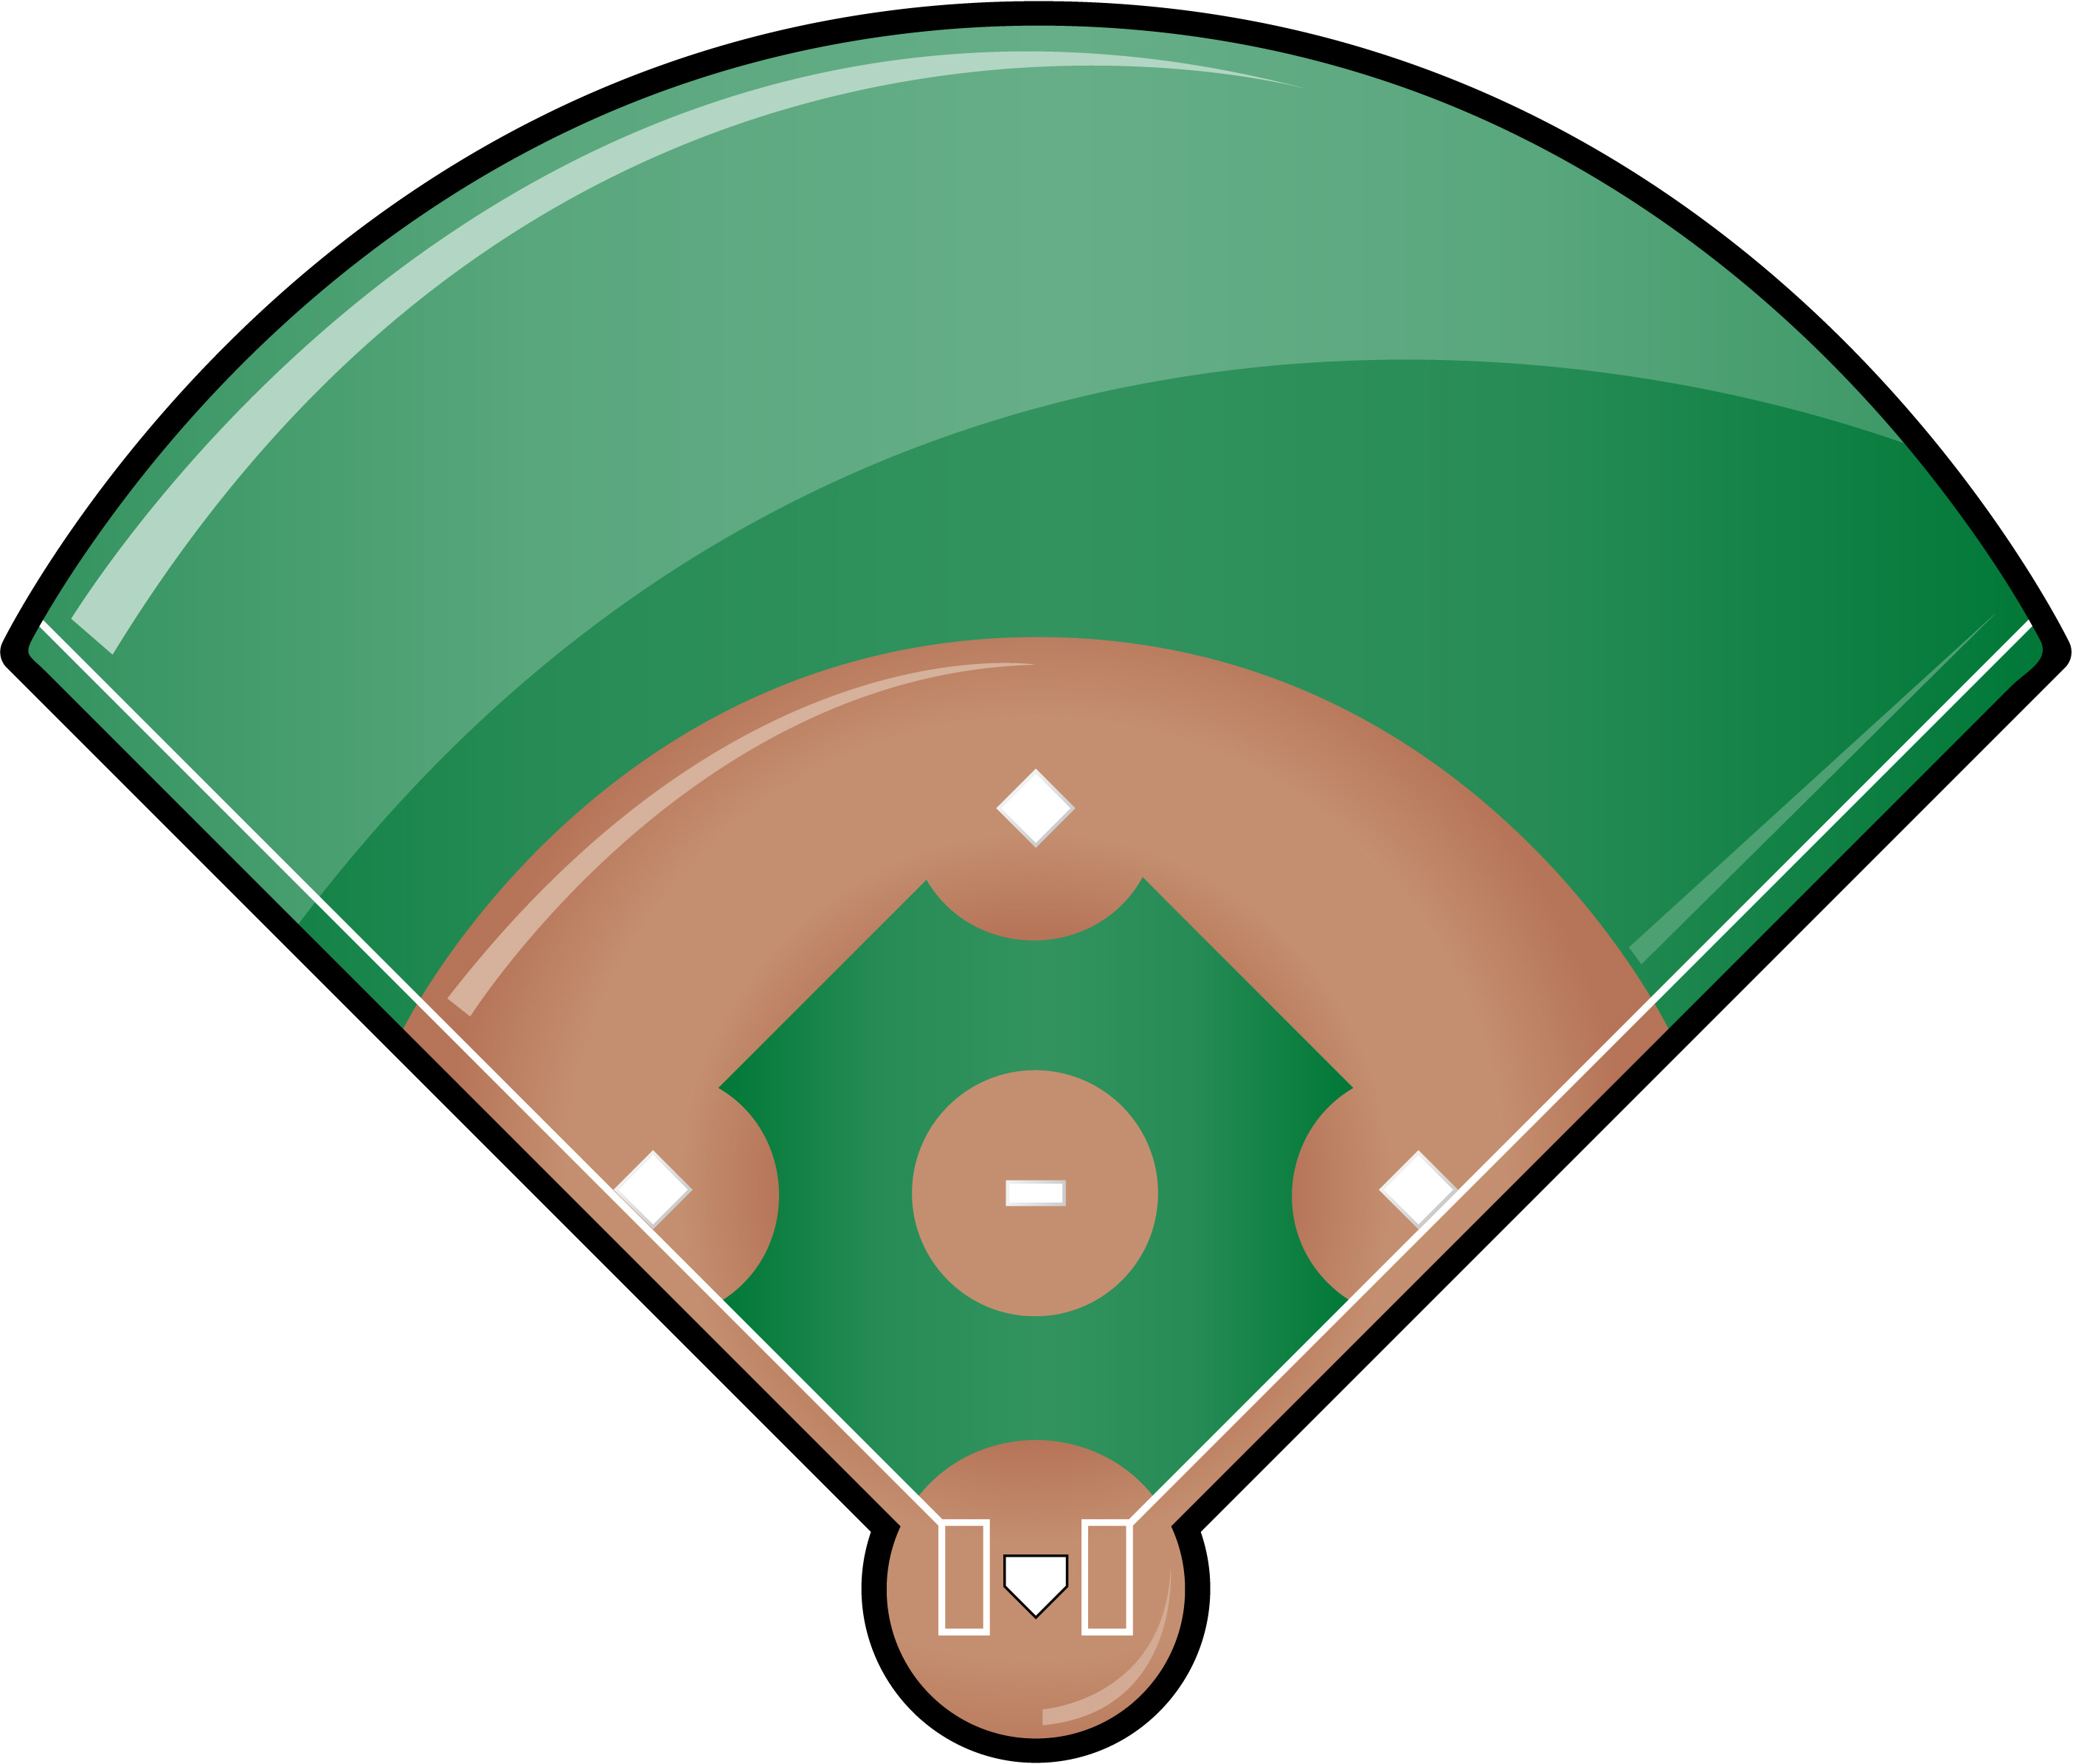 Baseball field clipart free images